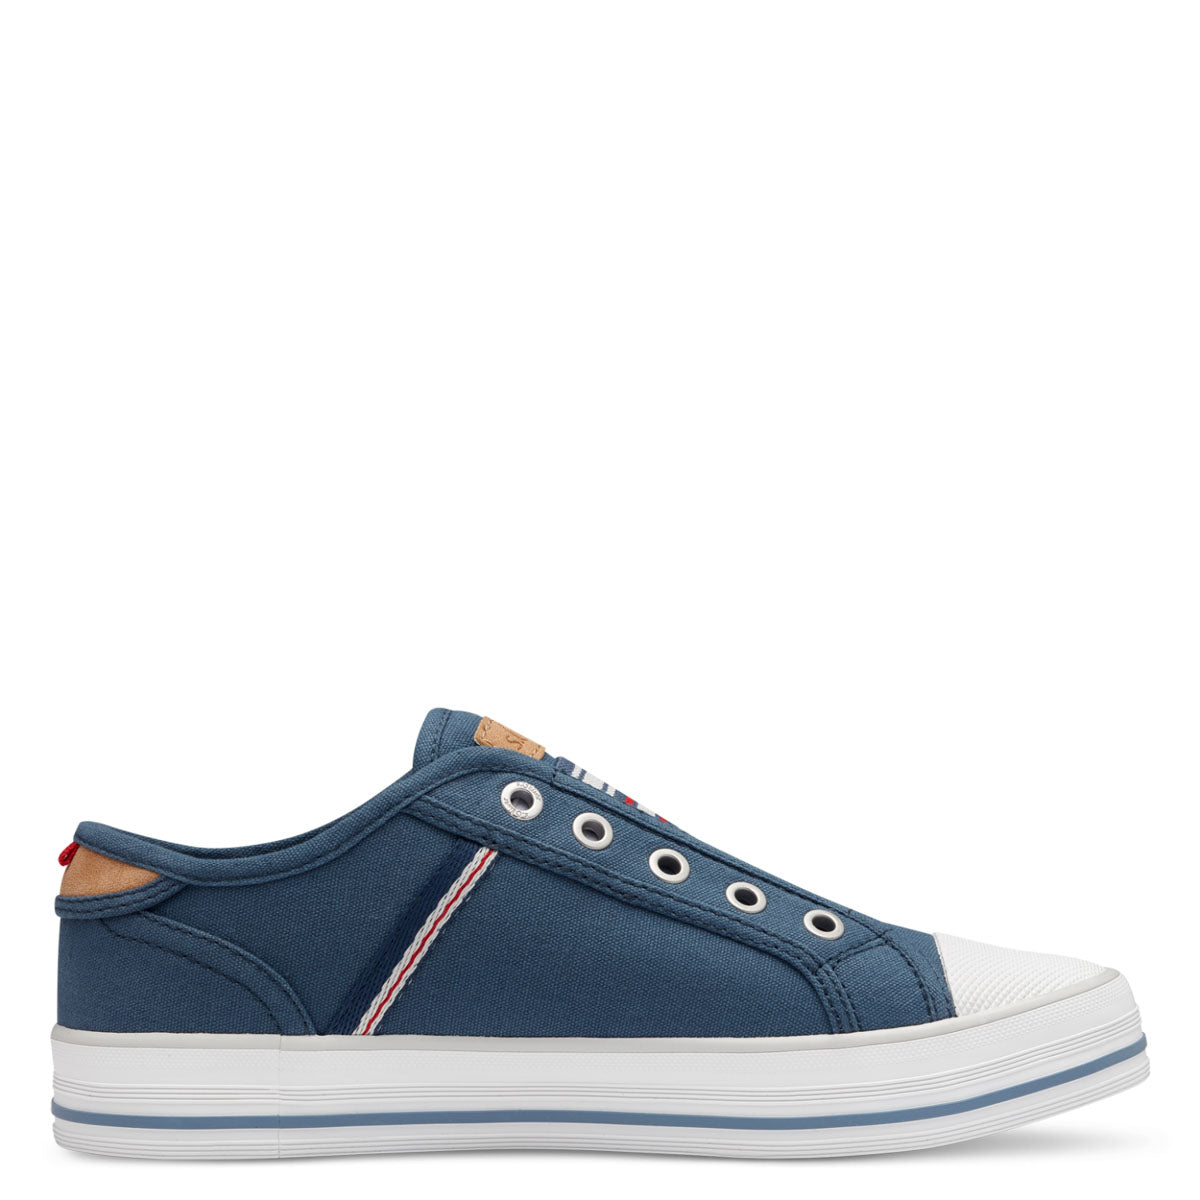 Interior view showing the soft foam insole for ultimate comfort in the S Oliver navy sneakers.